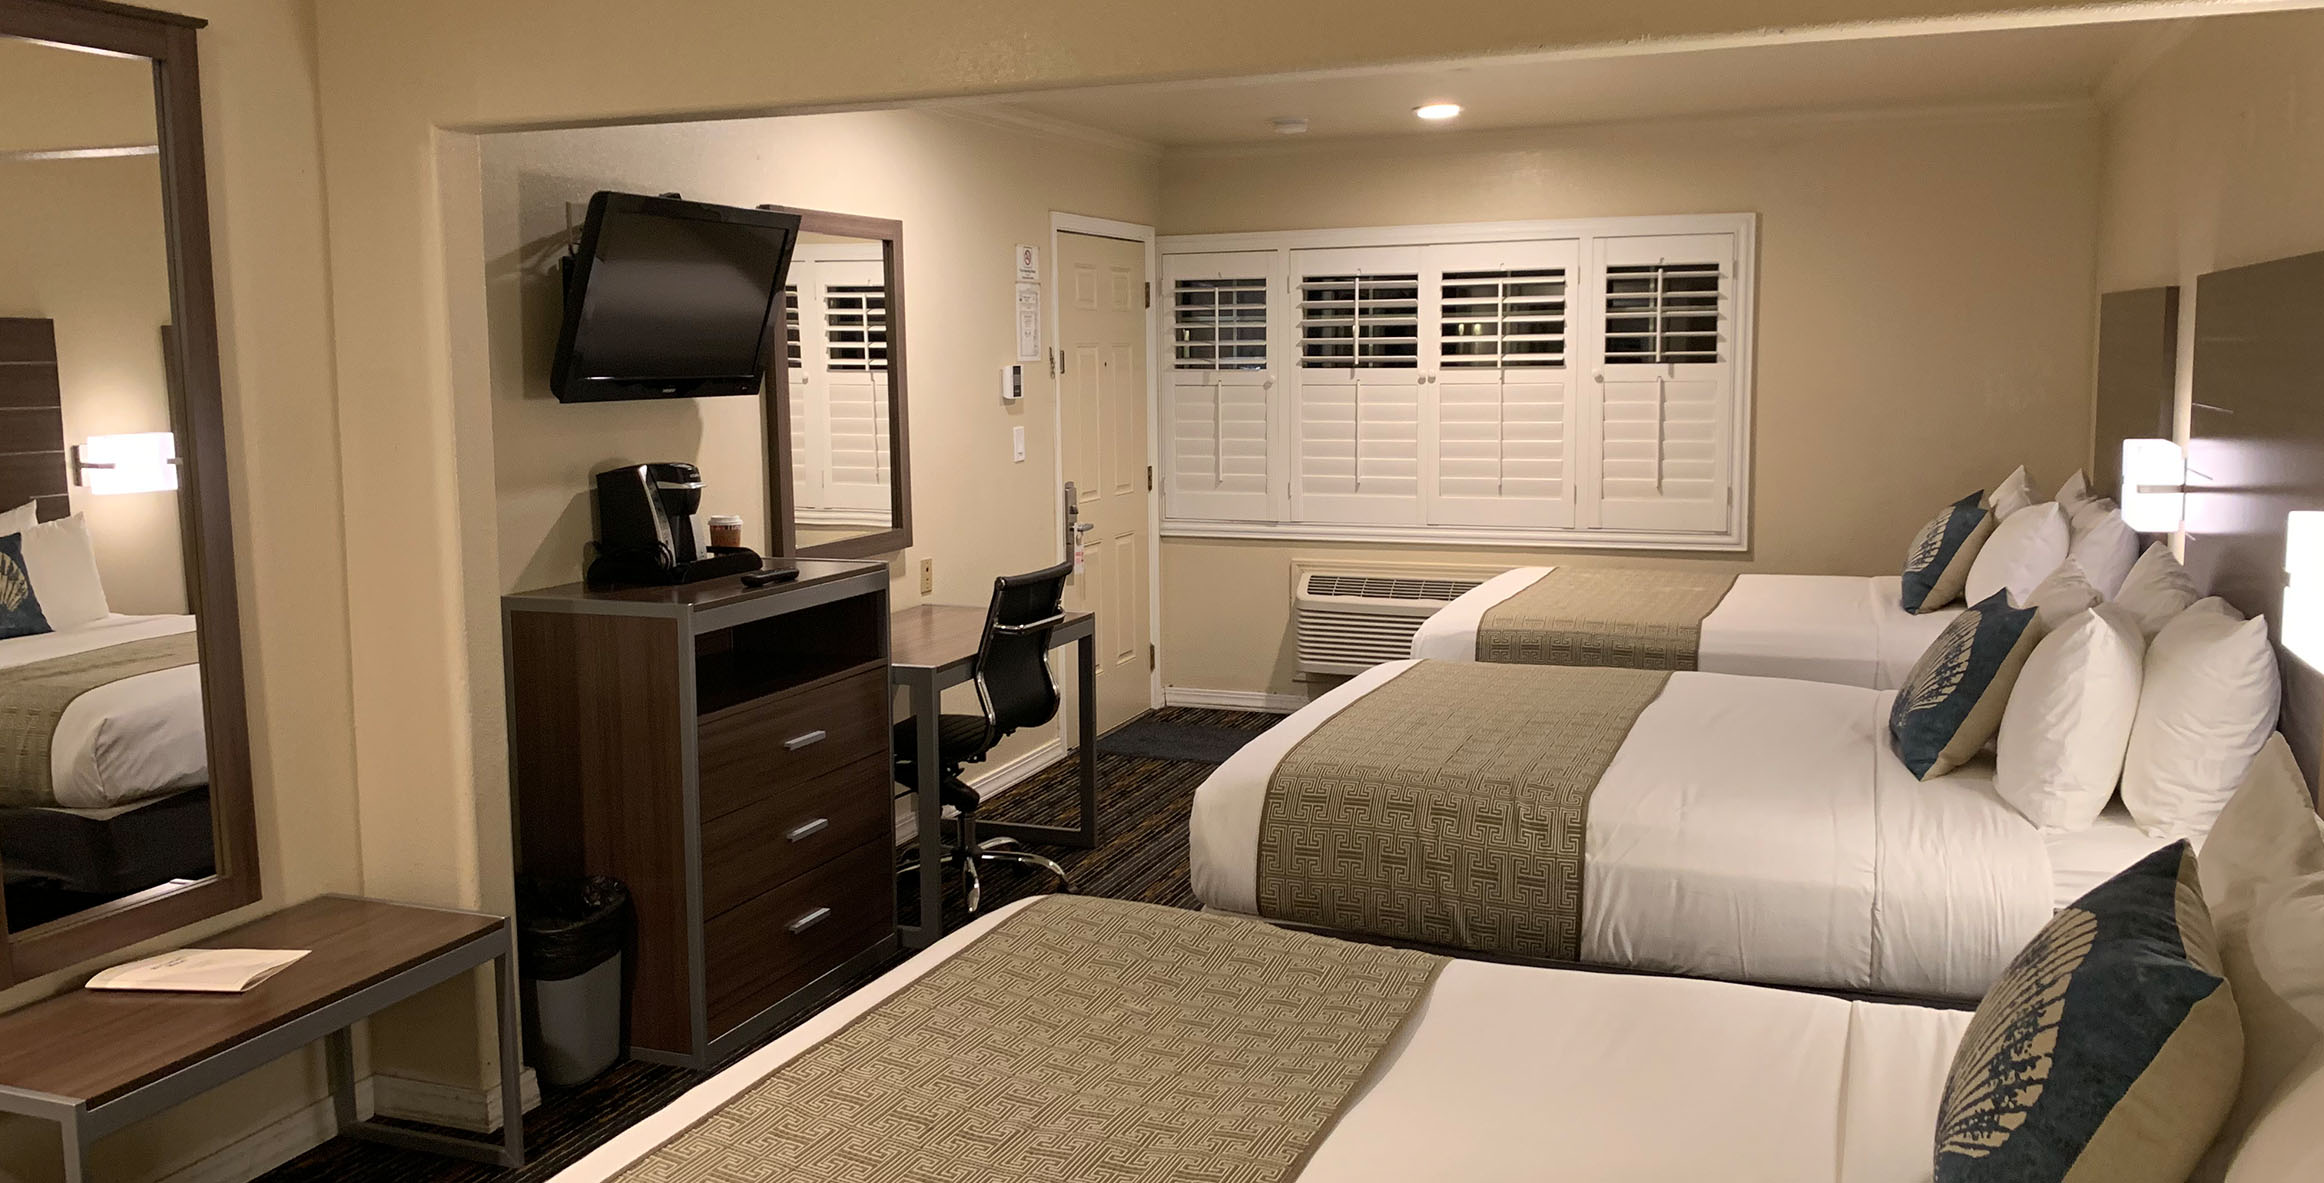 OUR SPACIOUS AND MODERN ROOMS AWAIT YOU